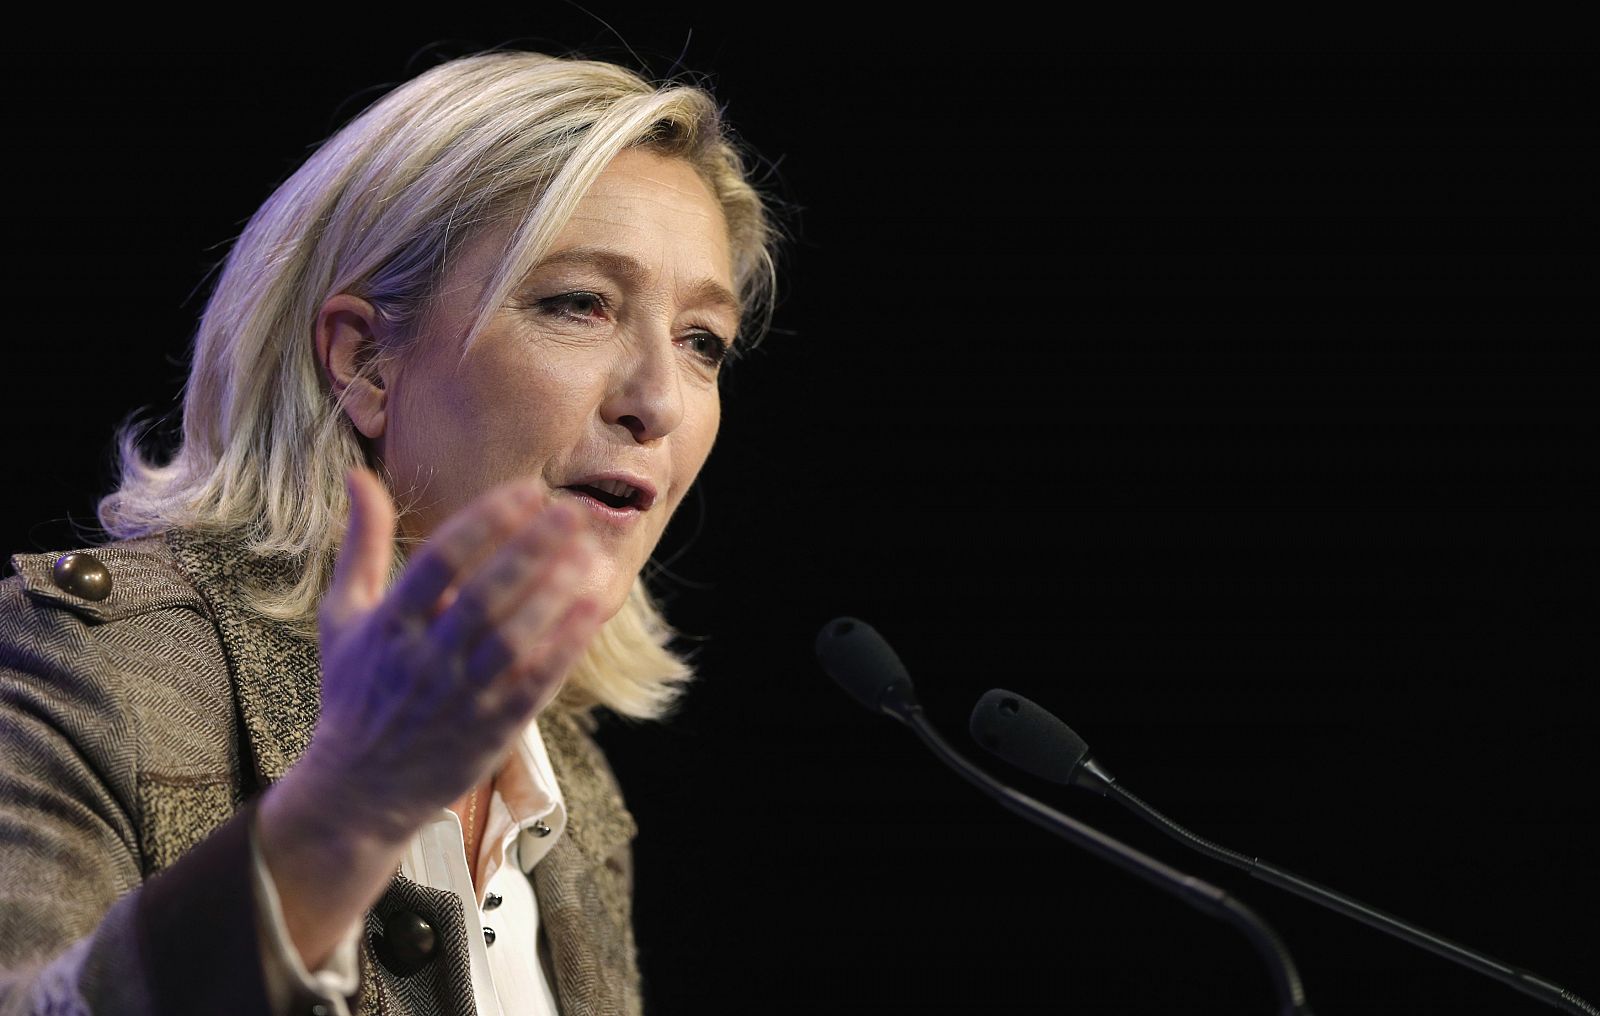 France's far-right National Front political party leader Marine Le Pen attends a party meeting in Paris